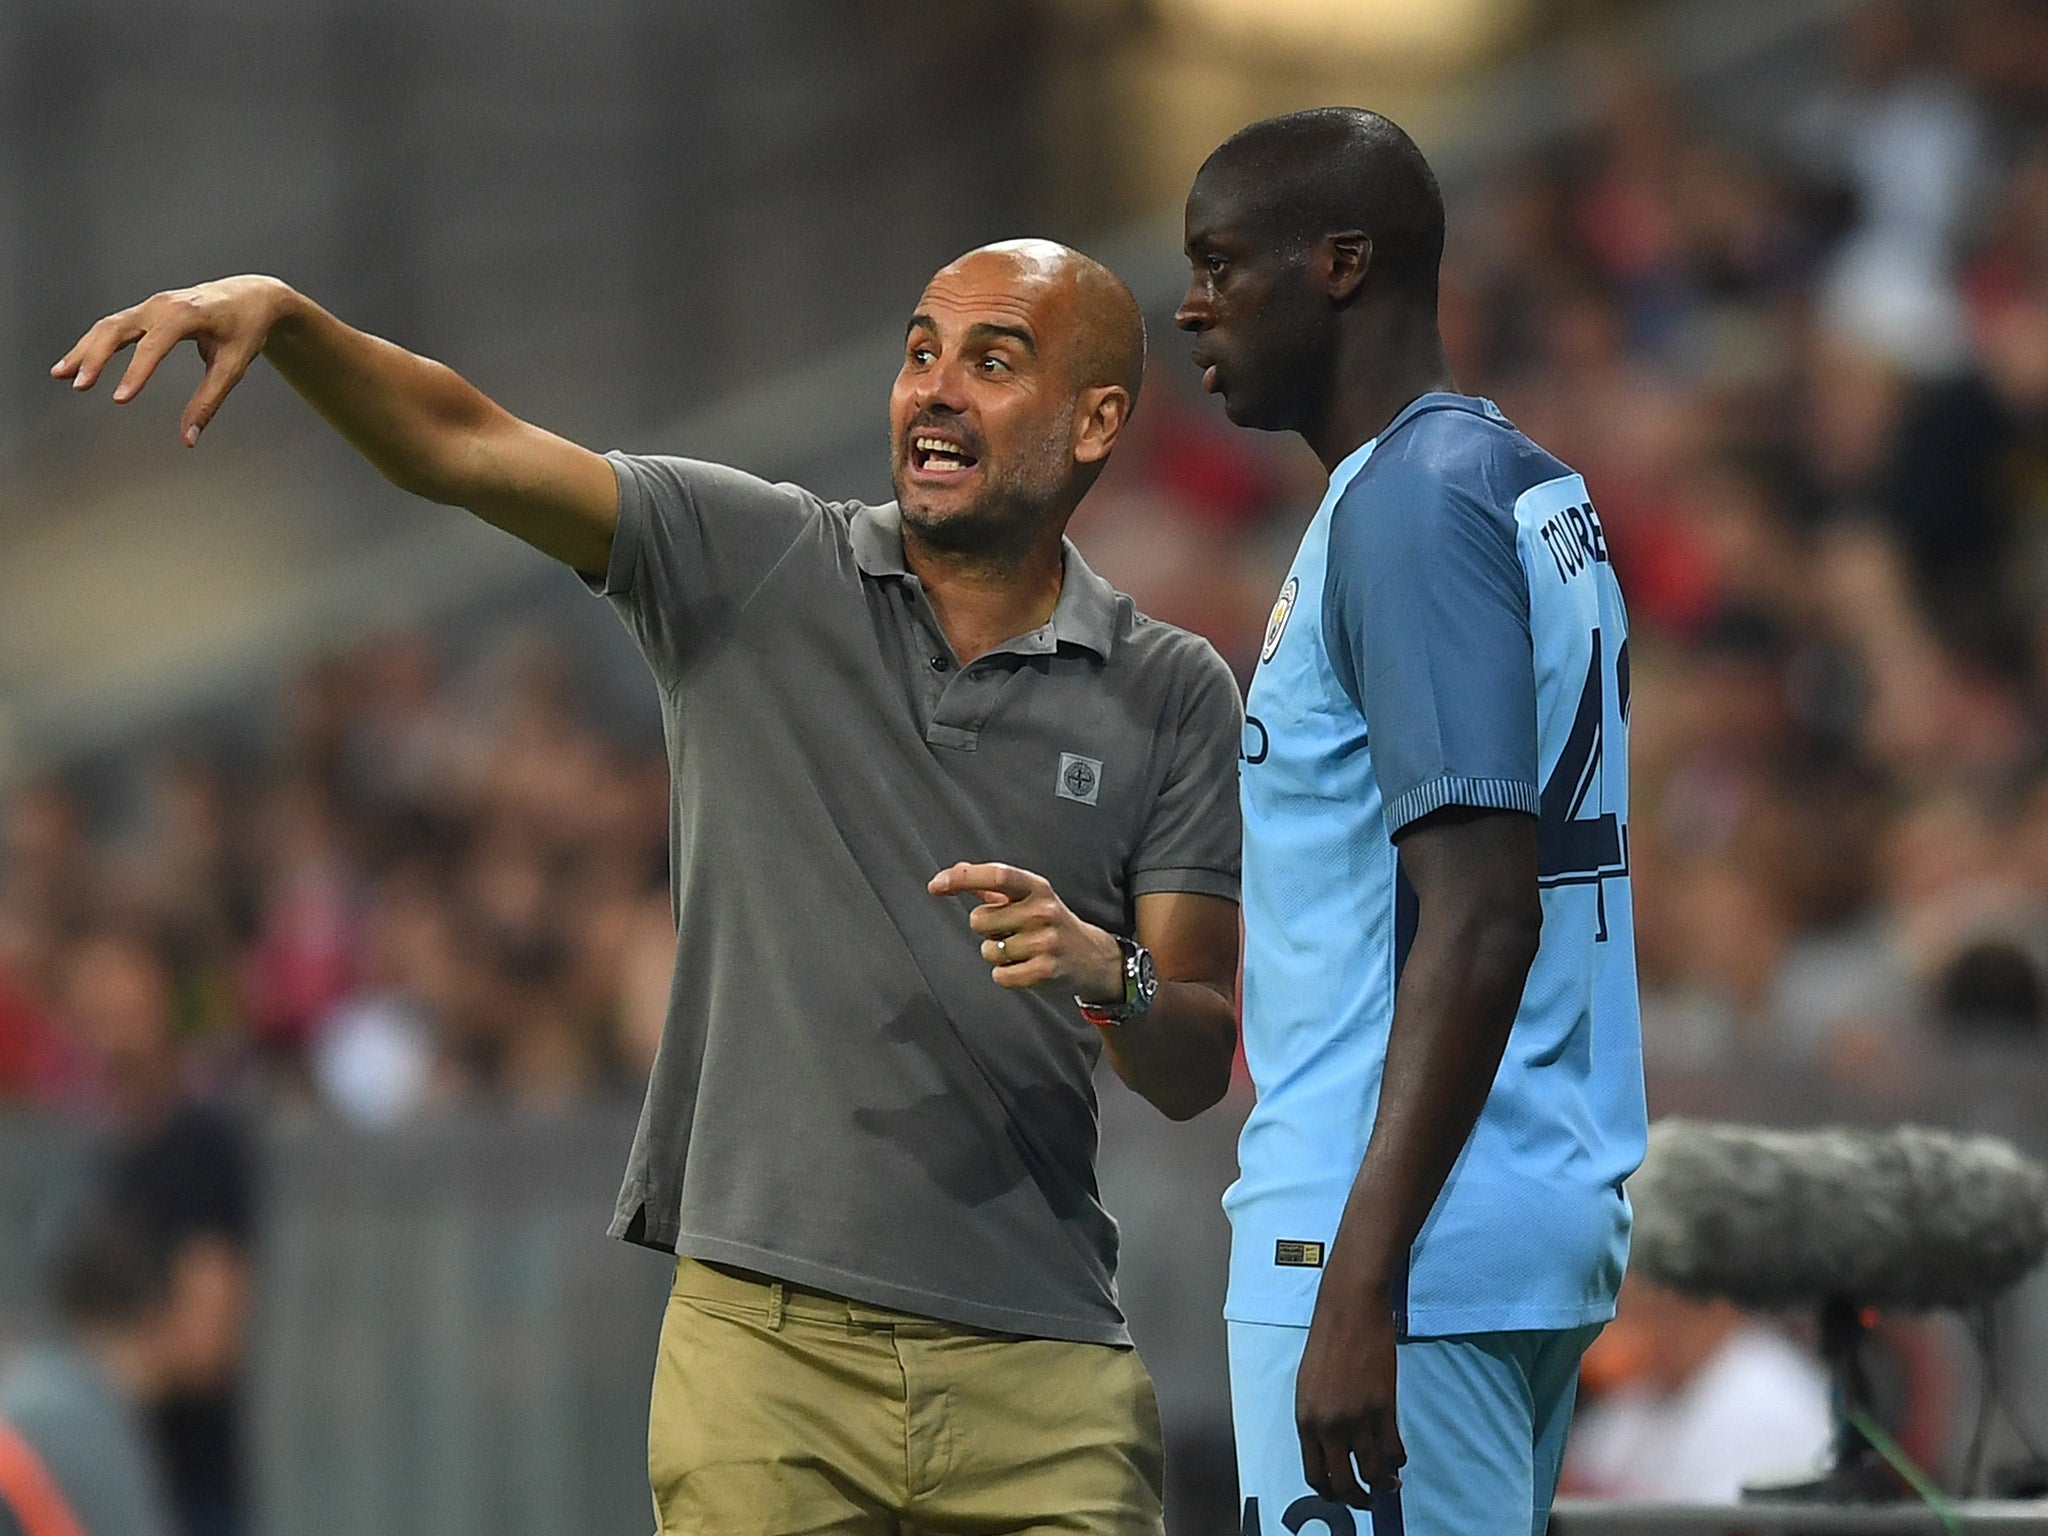 Yaya Toure was left out of City's squad for their opening match of the season against Sunderland